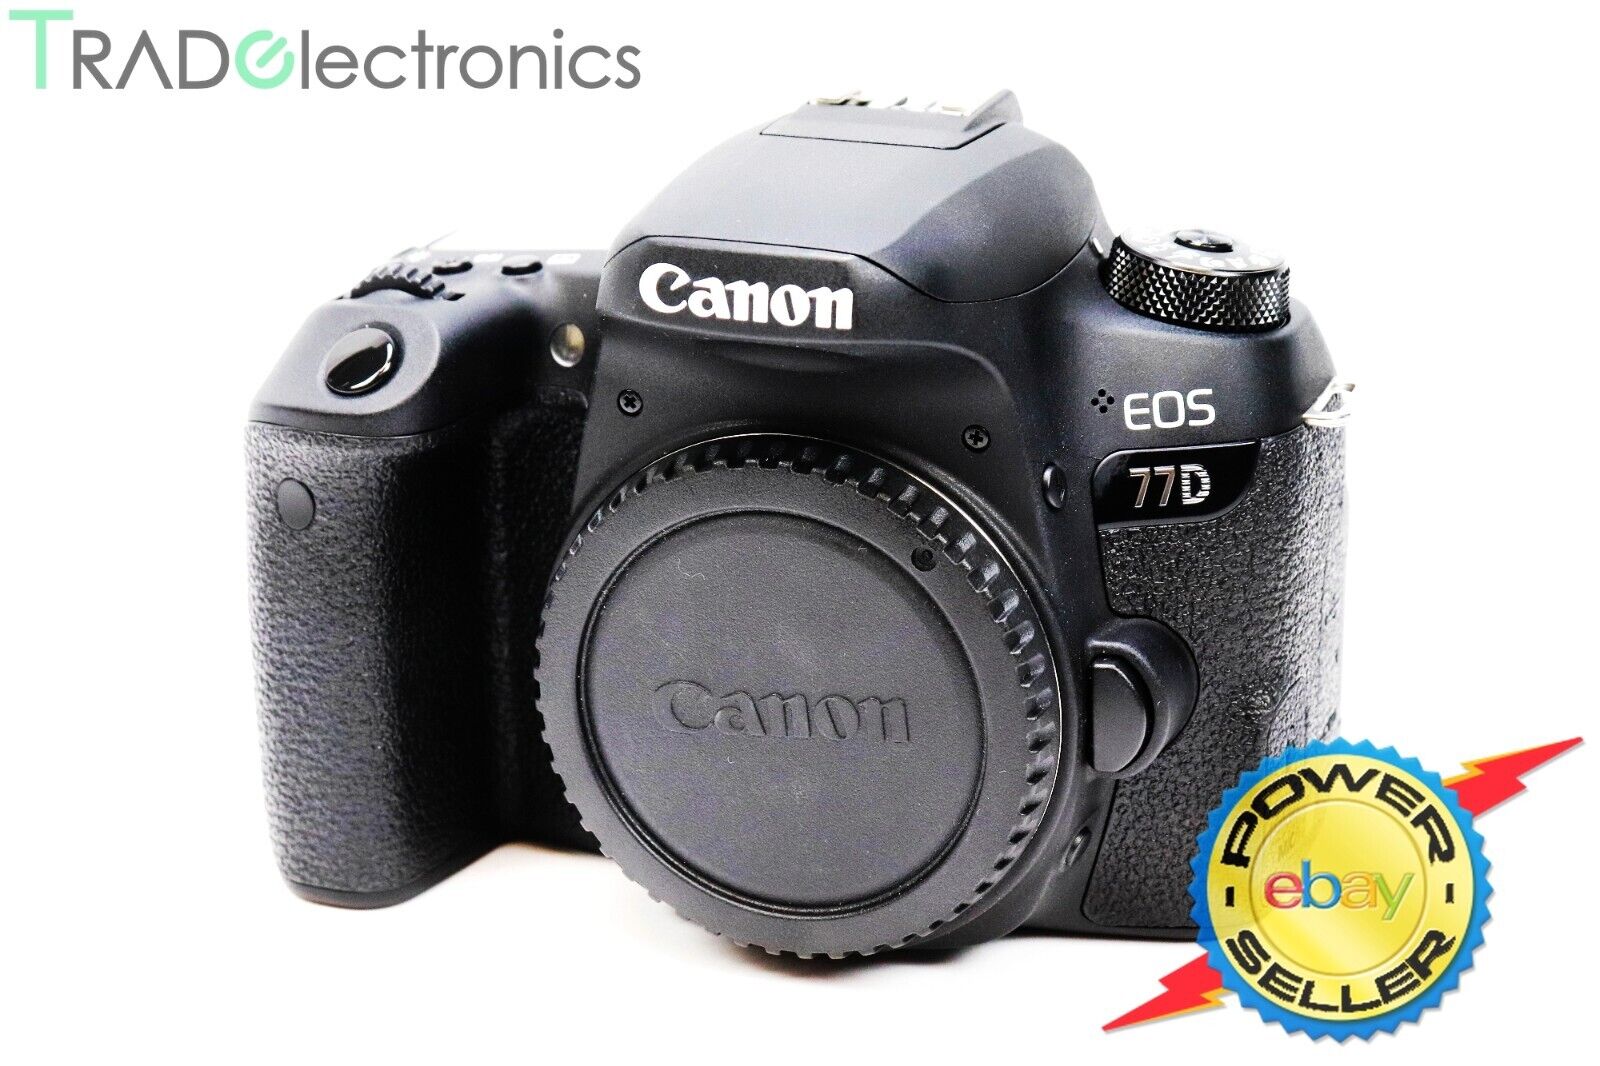 Supersonic speed rare Thespian Canon EOS 77D DSLR Camera | Buy used camera | sell used camera